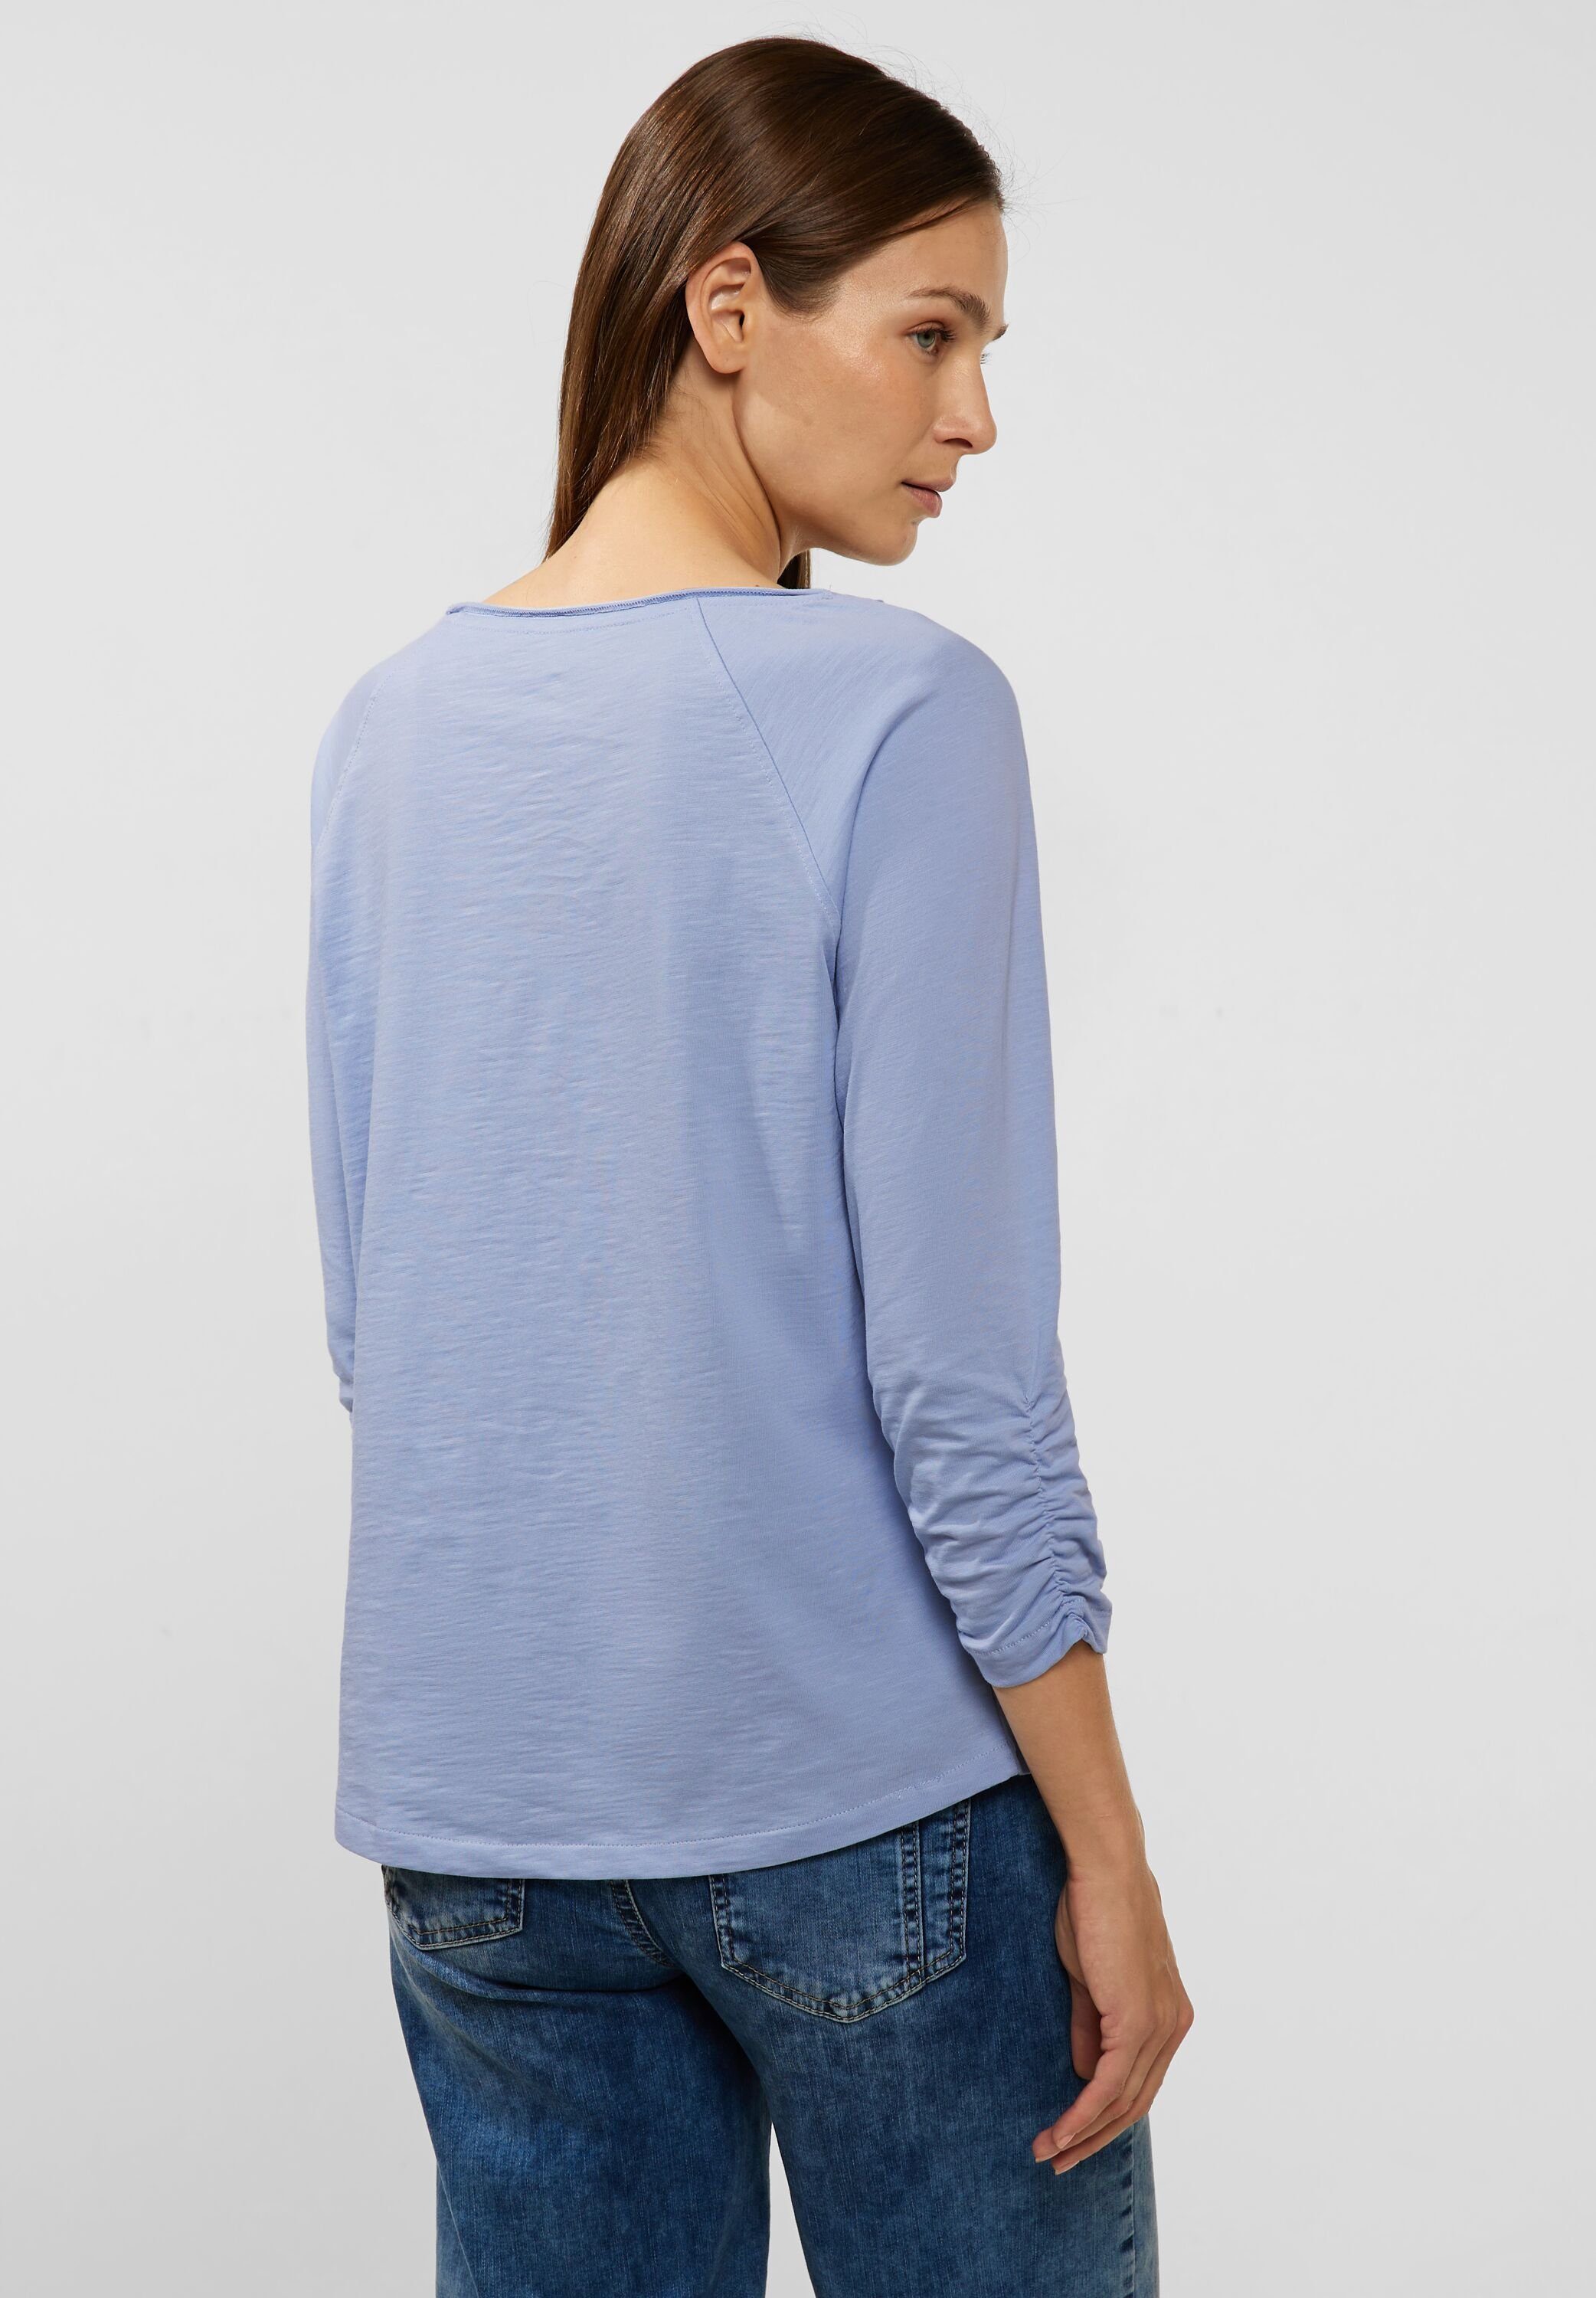 STREET ONE 3/4-Arm-Shirt in blue Unifarbe mid sunny